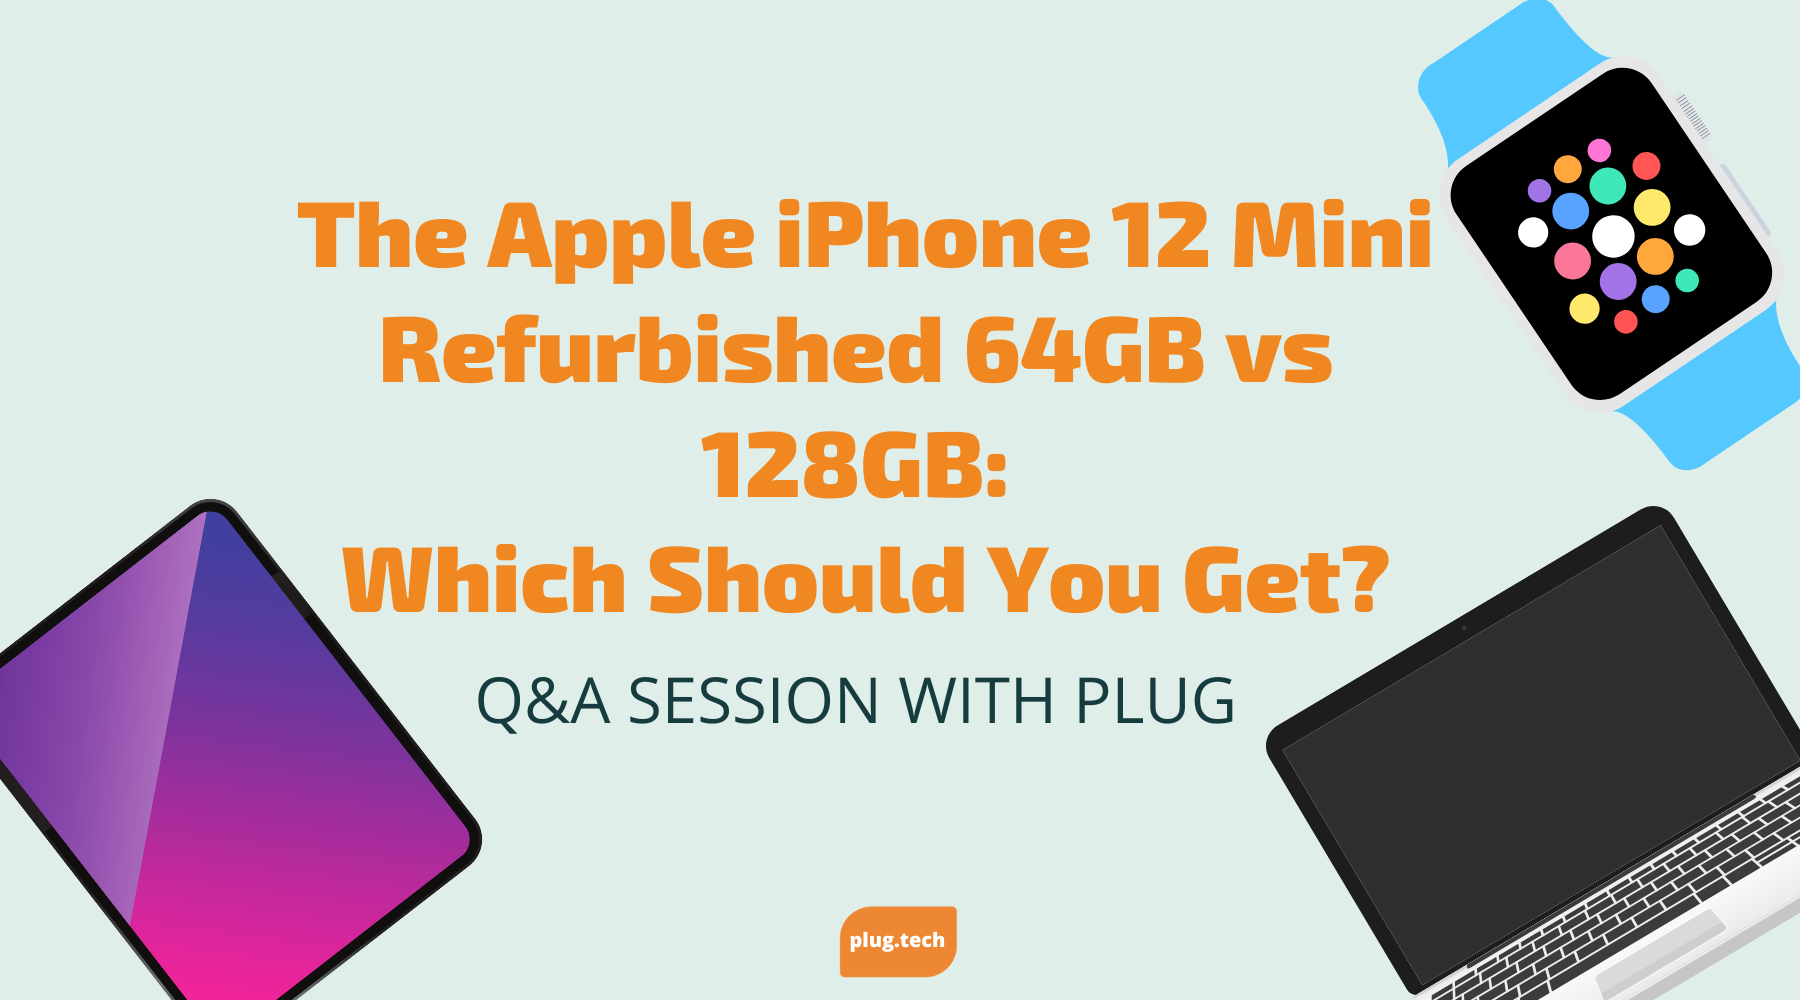 The Apple iPhone 12 Mini Refurbished 64GB vs 128GB: Which Should You Get?